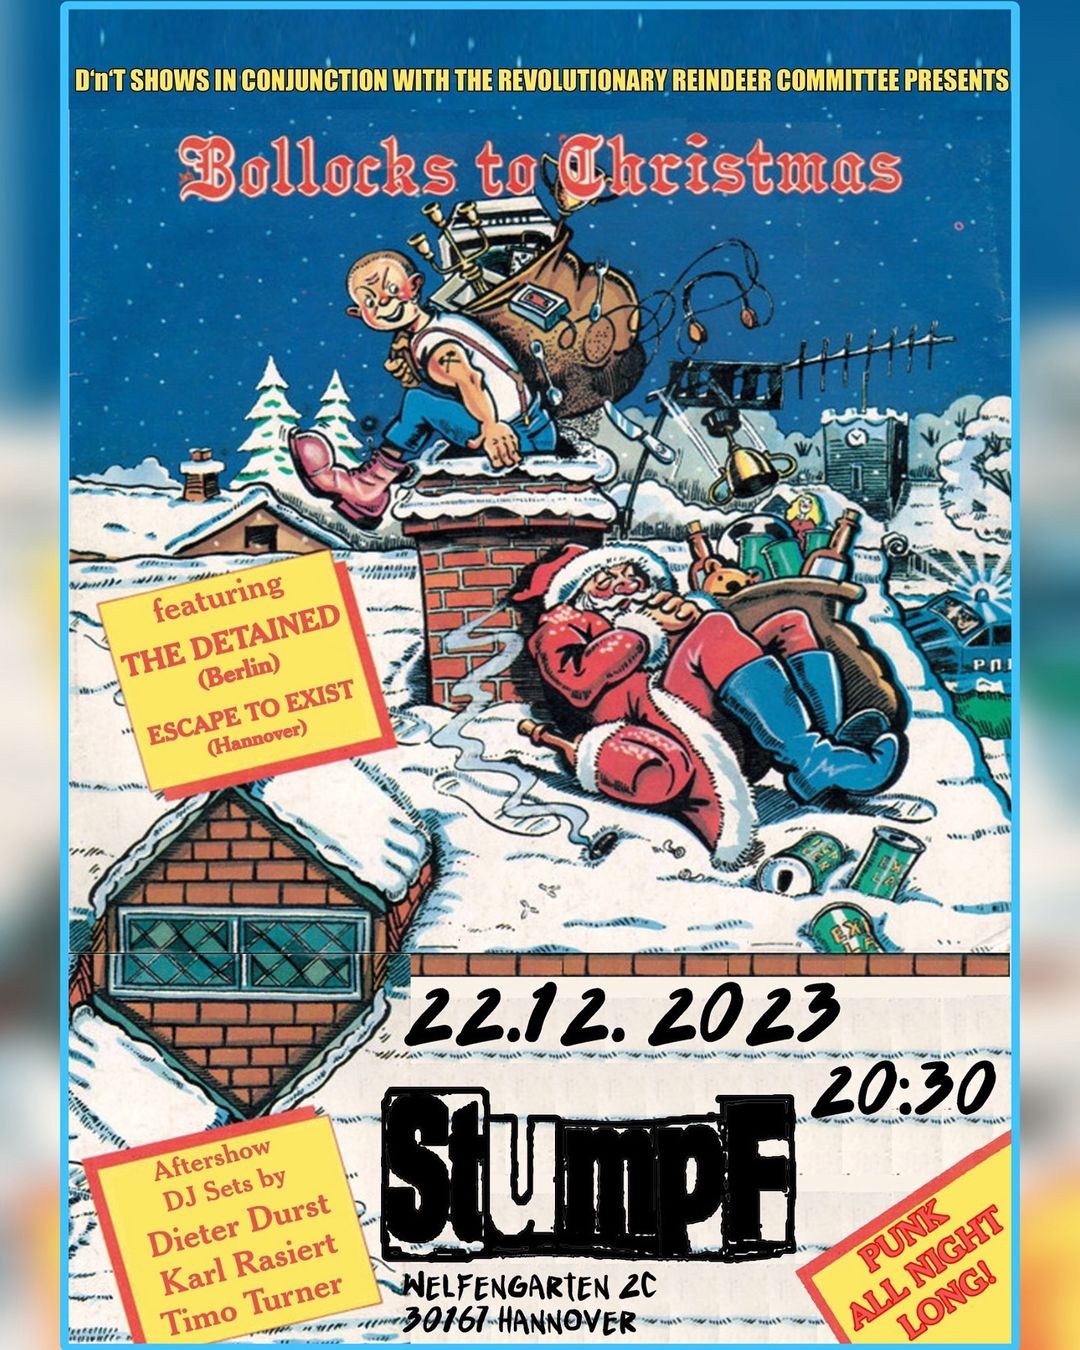 Bollocks to Christmas: The Detained + Escape To Exist + Party